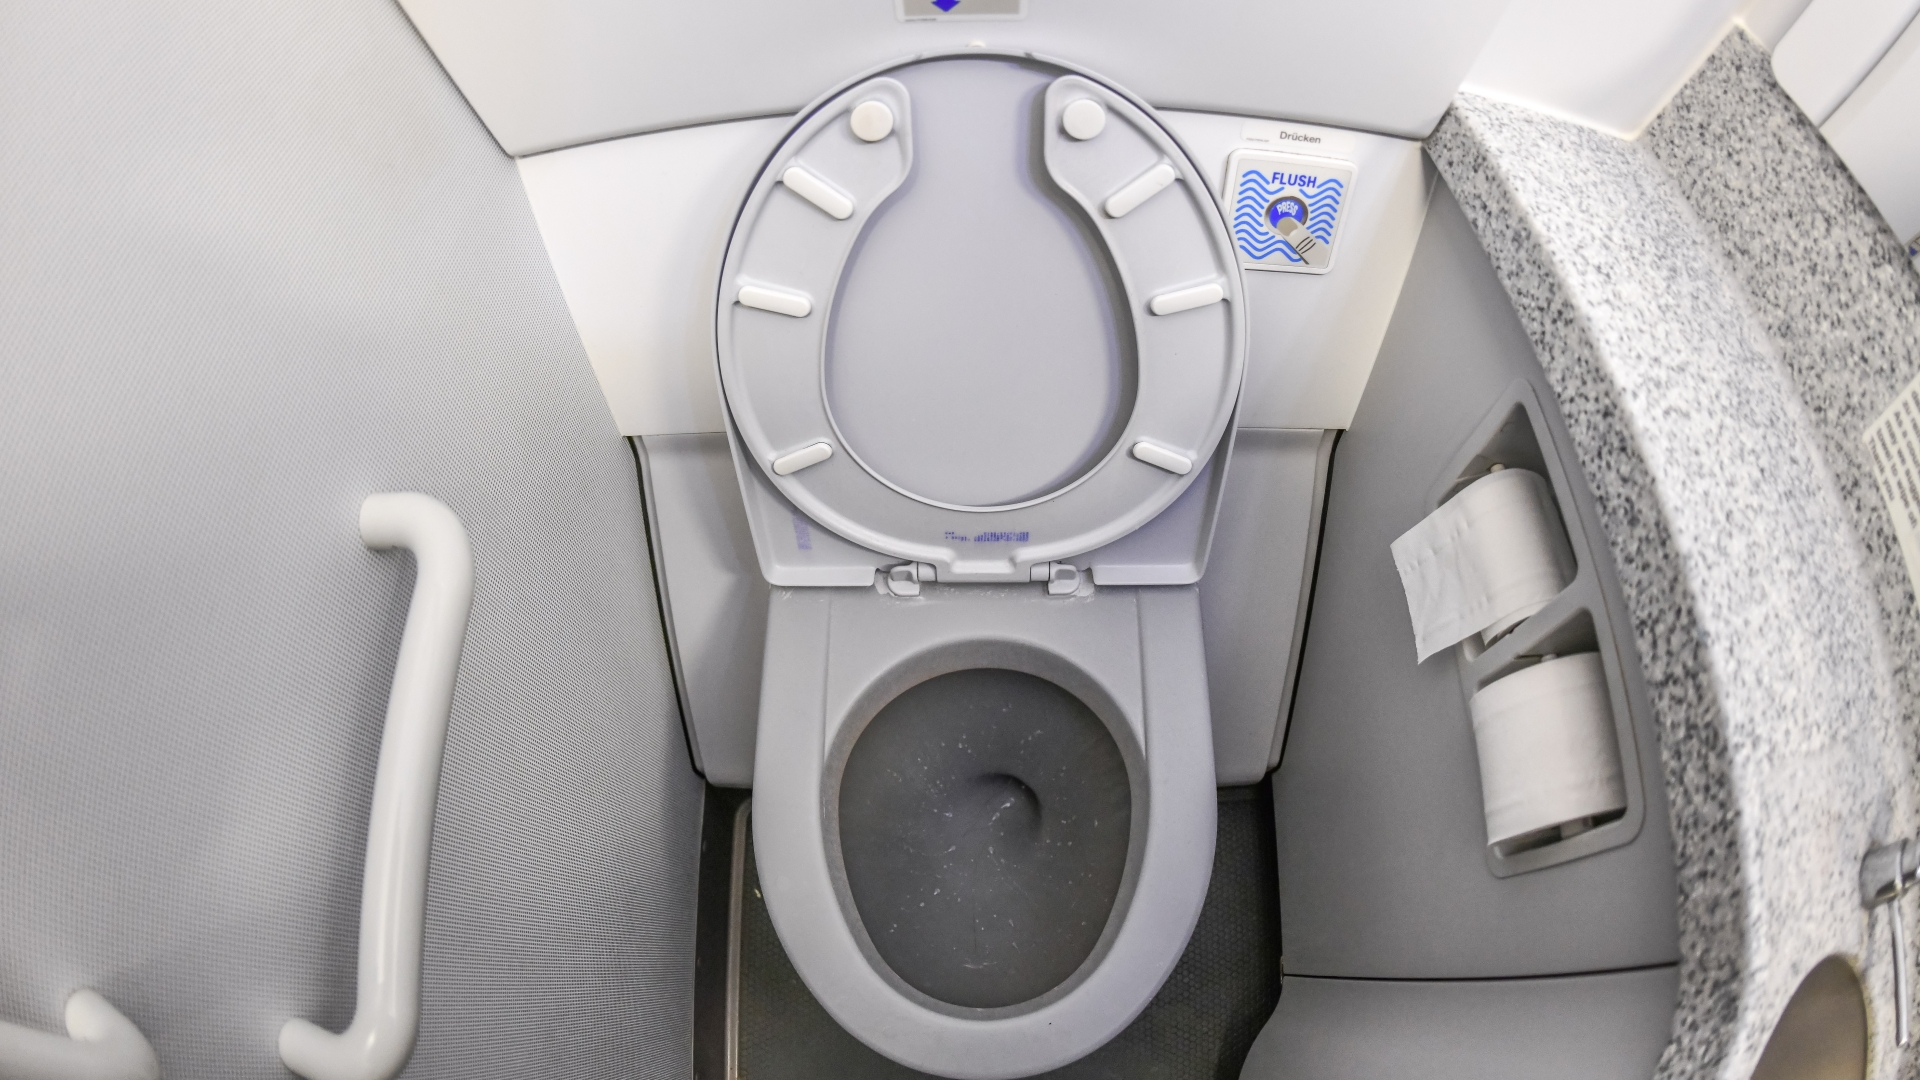 I’m an airline pilot – there’s a surprising way that plane toilets are emptied…and flight crew actually LOVE doing it